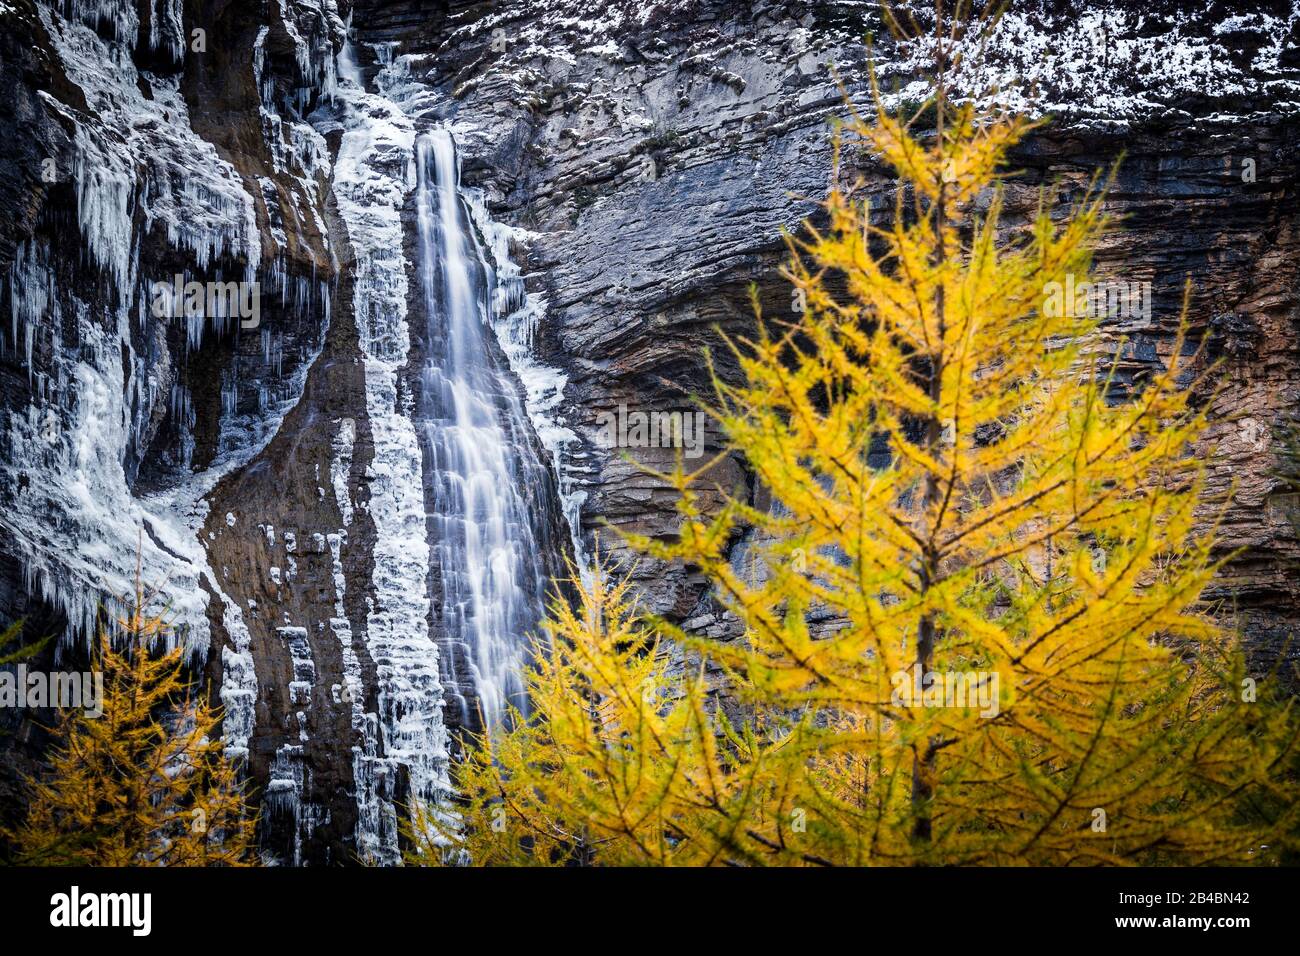 France, Alpes-Maritimes, Mercantour National Park, Tinée valley, Roya, orange-red fall color of European Larch (Larix decidua) from the Maïris valley and the Barres de Roya waterfall seen from the GR 5 Stock Photo